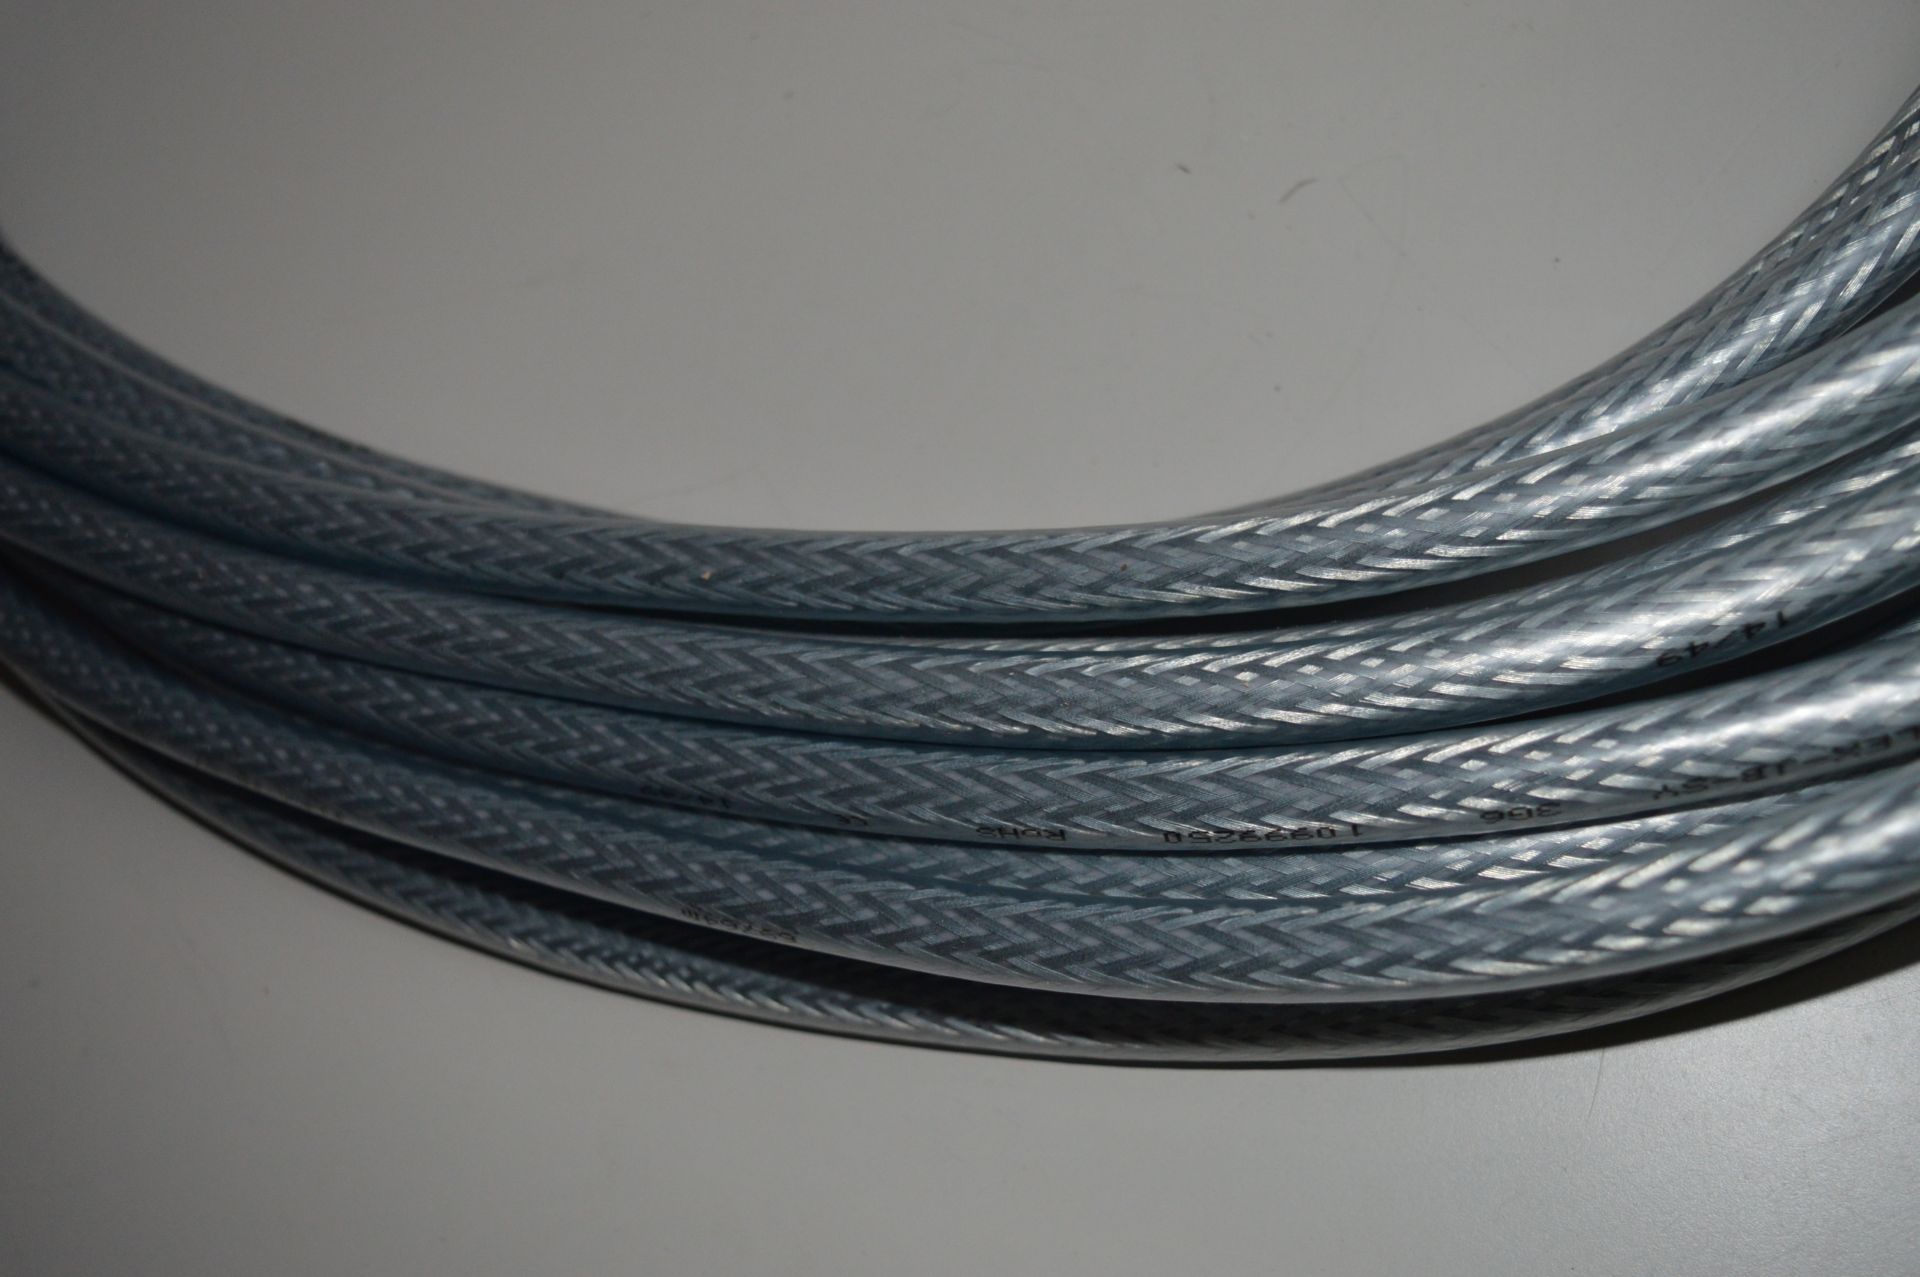 20 x Meters of Braided SY 3 Core 6.0mm Colour Coded Electric Cable - Unused - CL300 - Ref PC584 - - Image 3 of 4